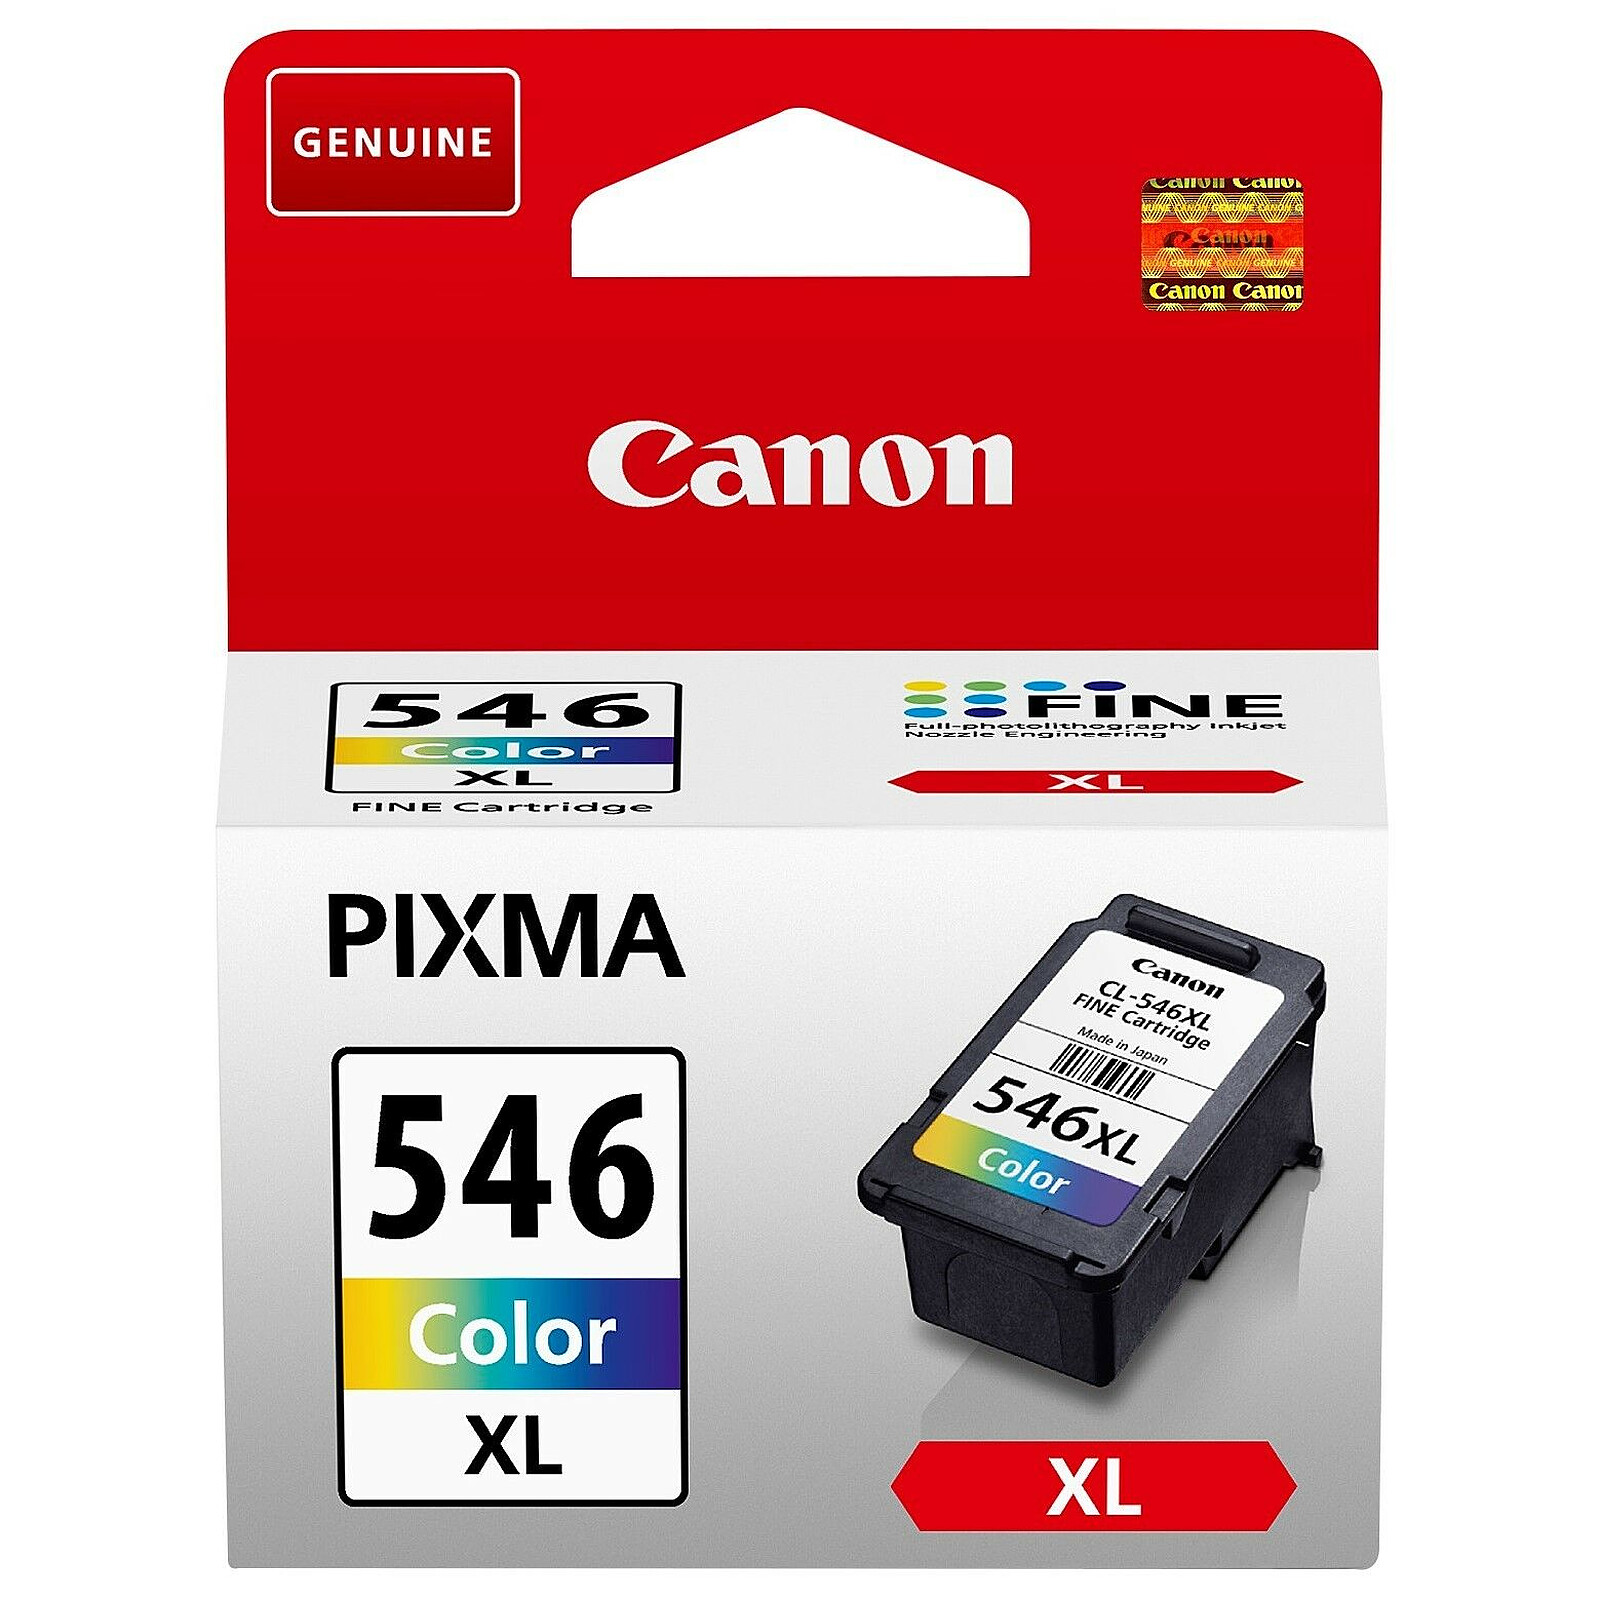 PG 545 XL / CL 546 XL 5-pack for Canon